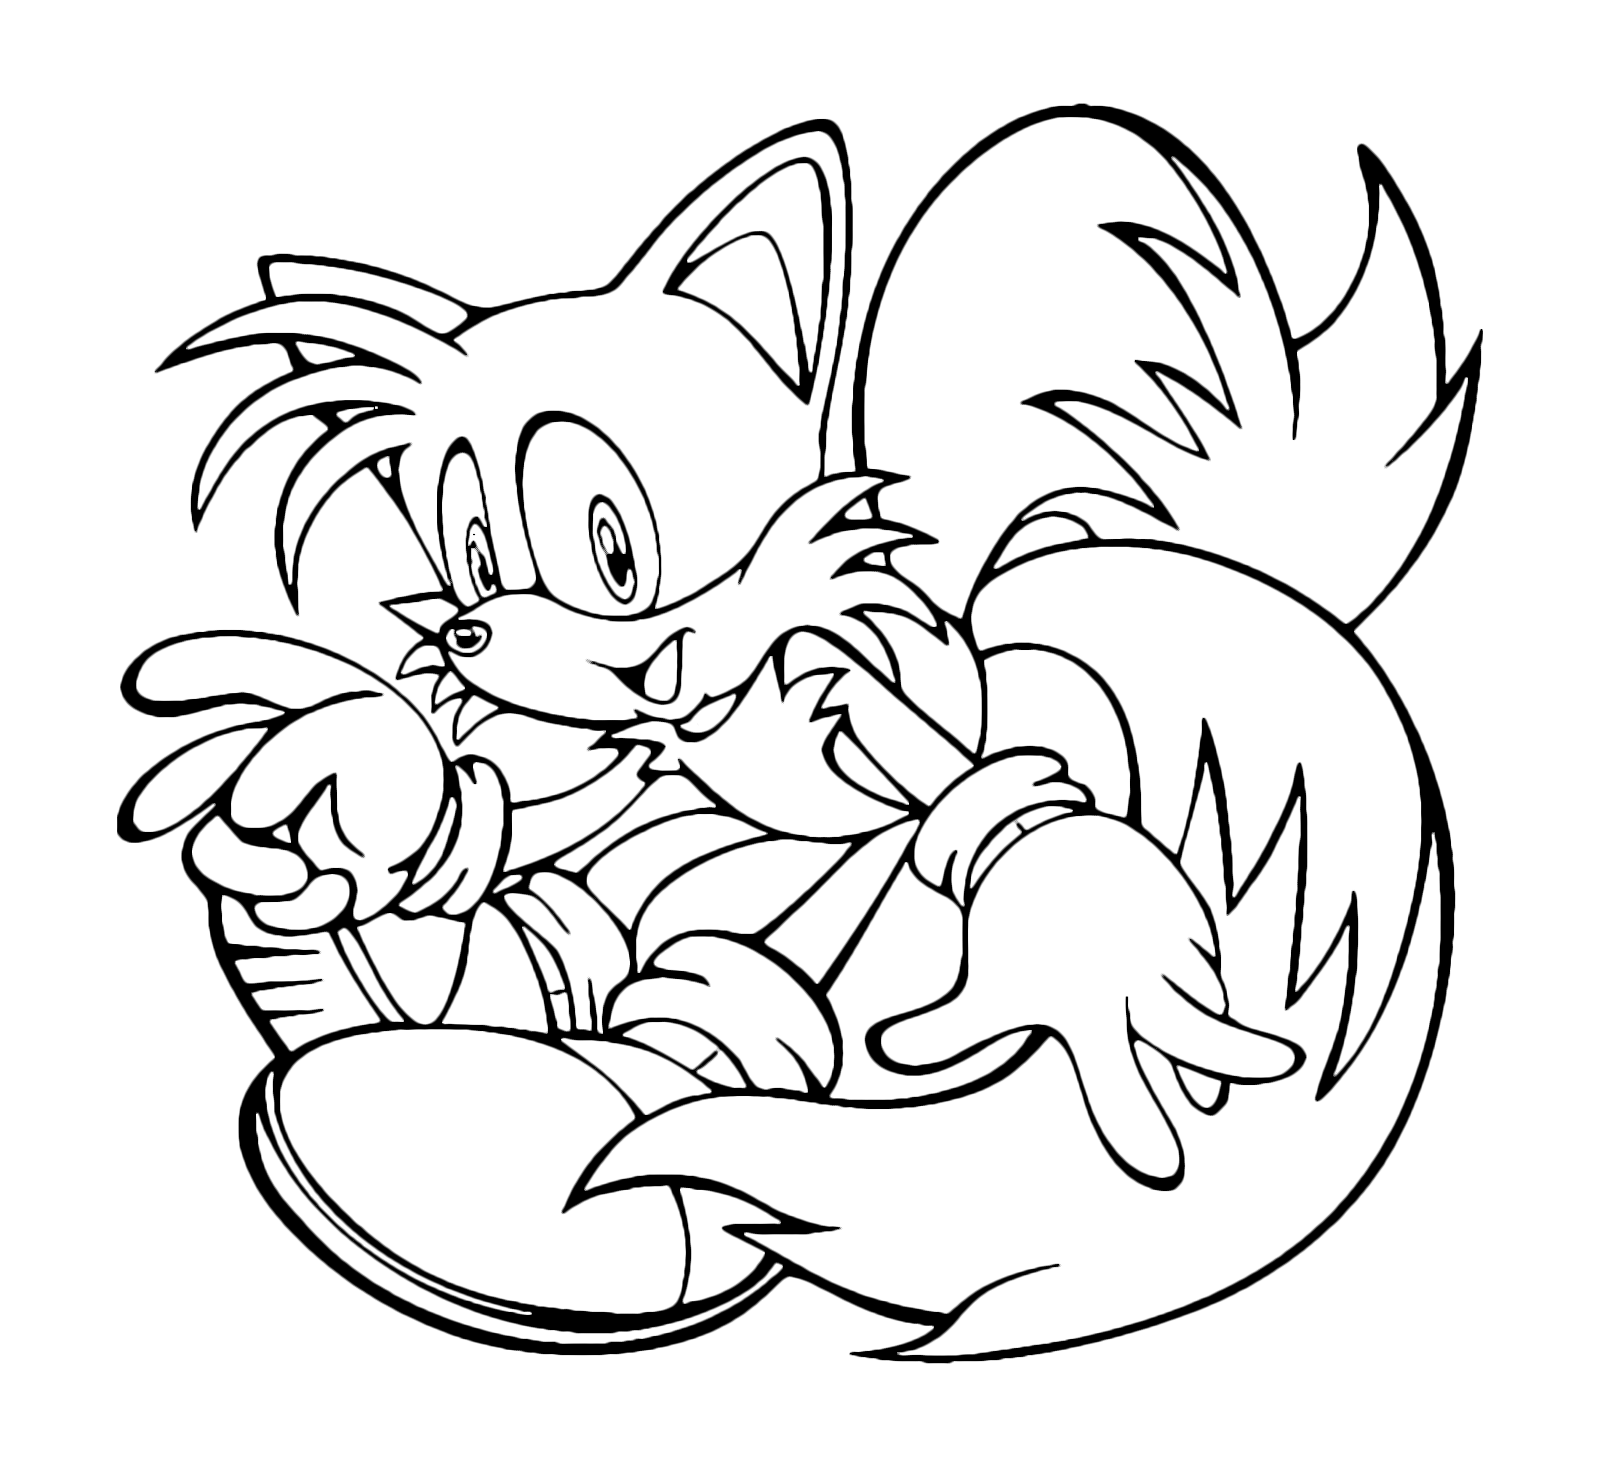 Sonic Boom Tails Coloring Pages - Free Printable Templates